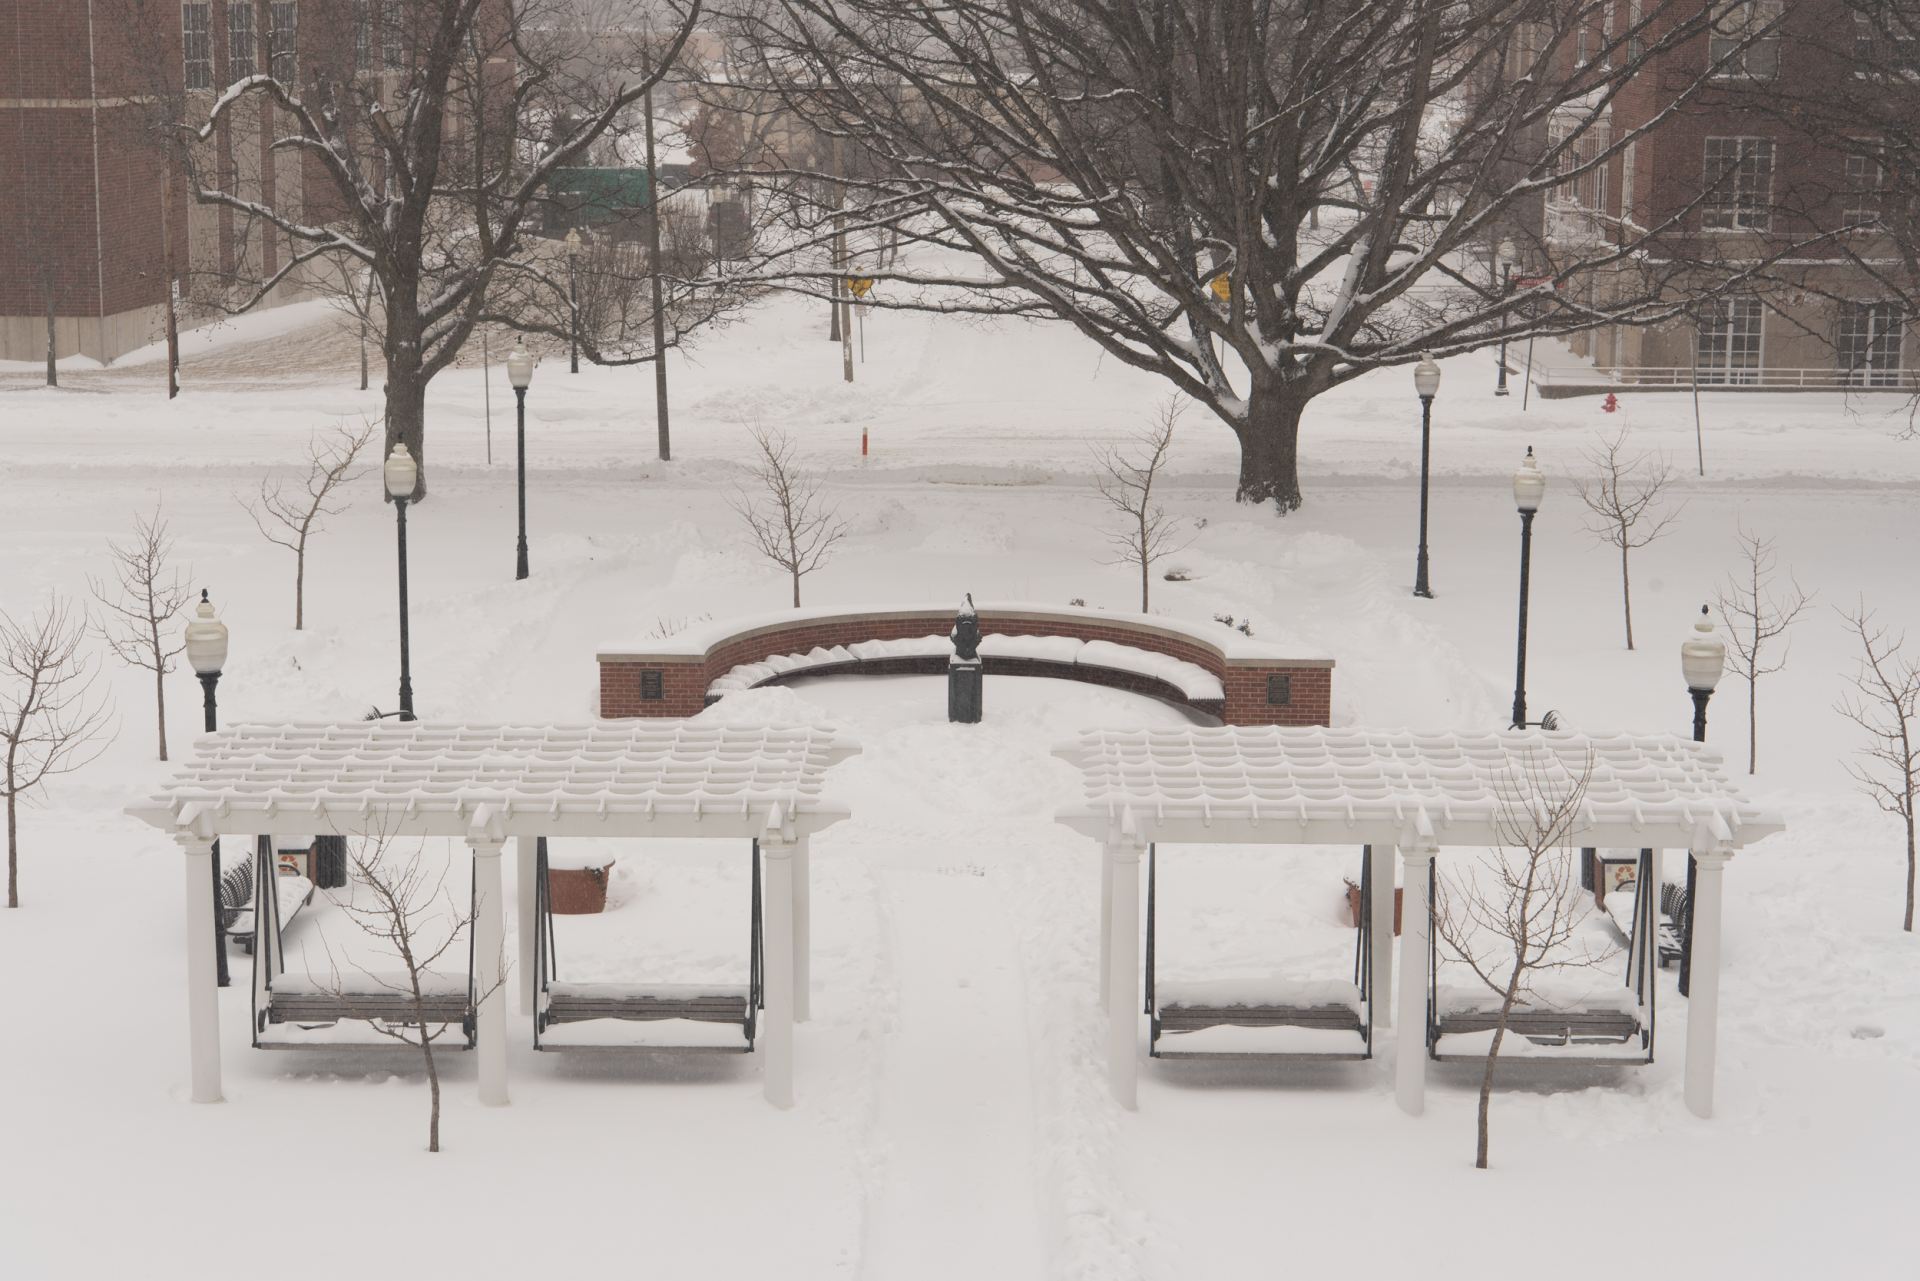 Redbird Plaza covered in snow.